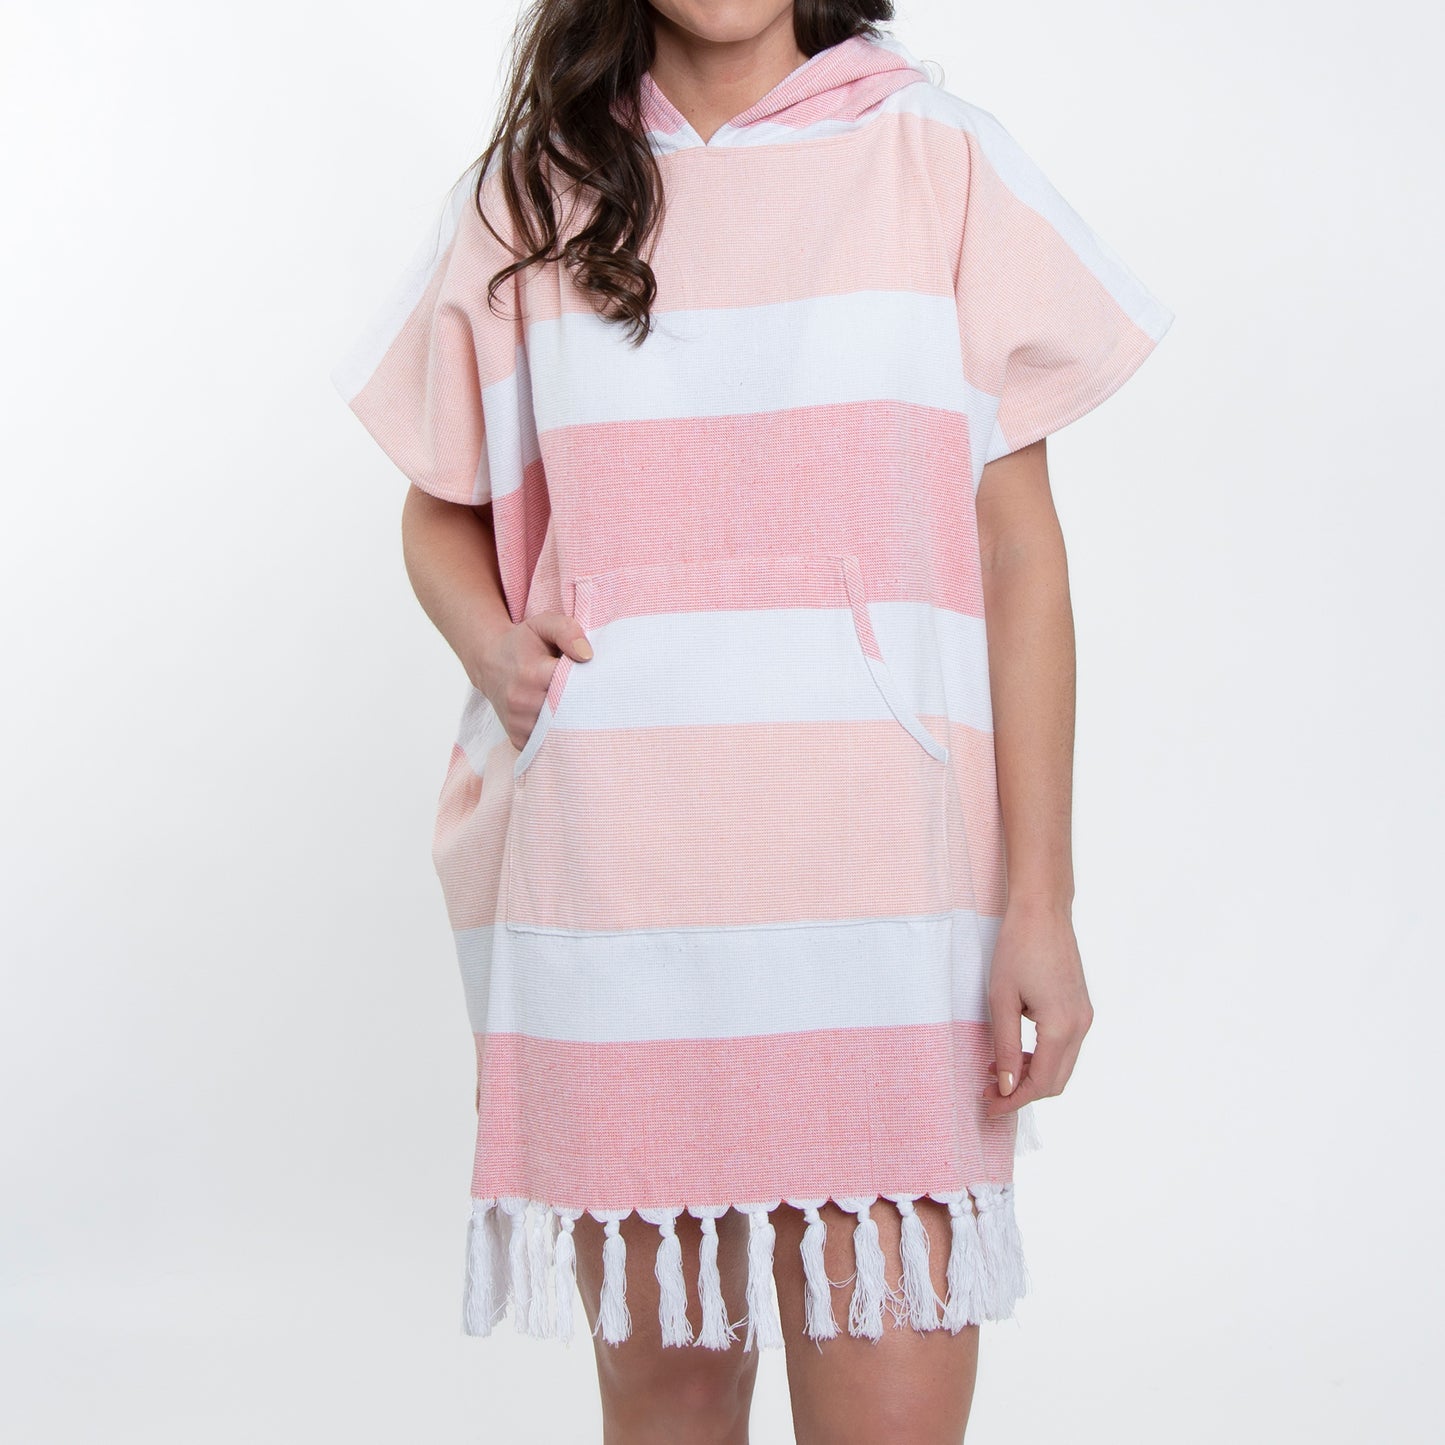 Freya Hooded Terry Cloth One Size Poncho Swimsuit Cover Up